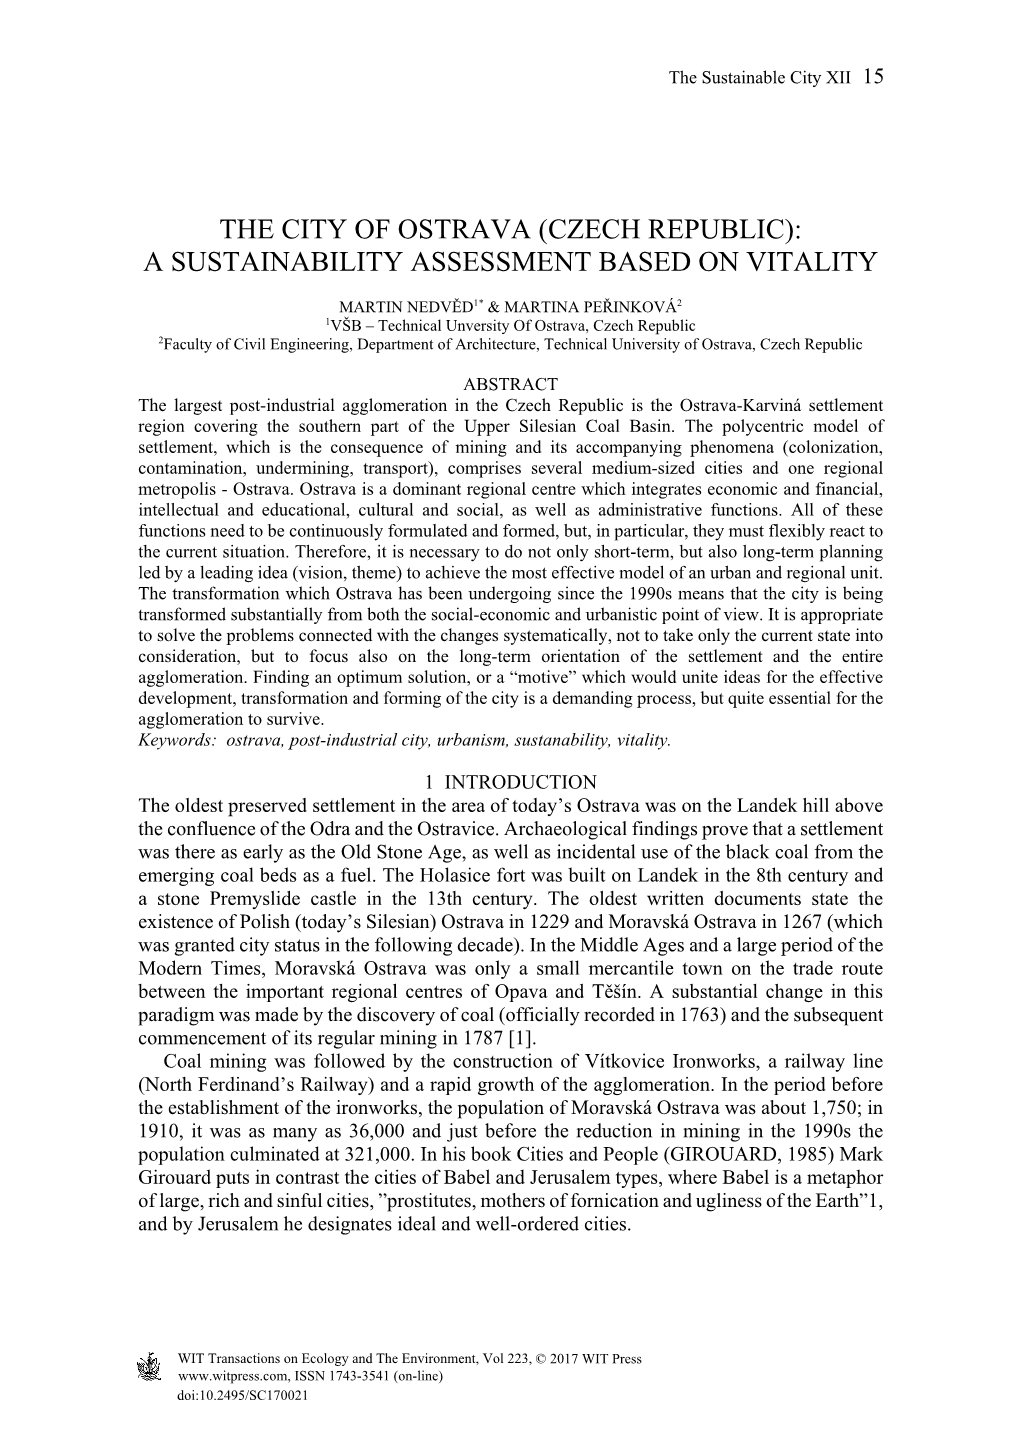 Czech Republic): a Sustainability Assessment Based on Vitality